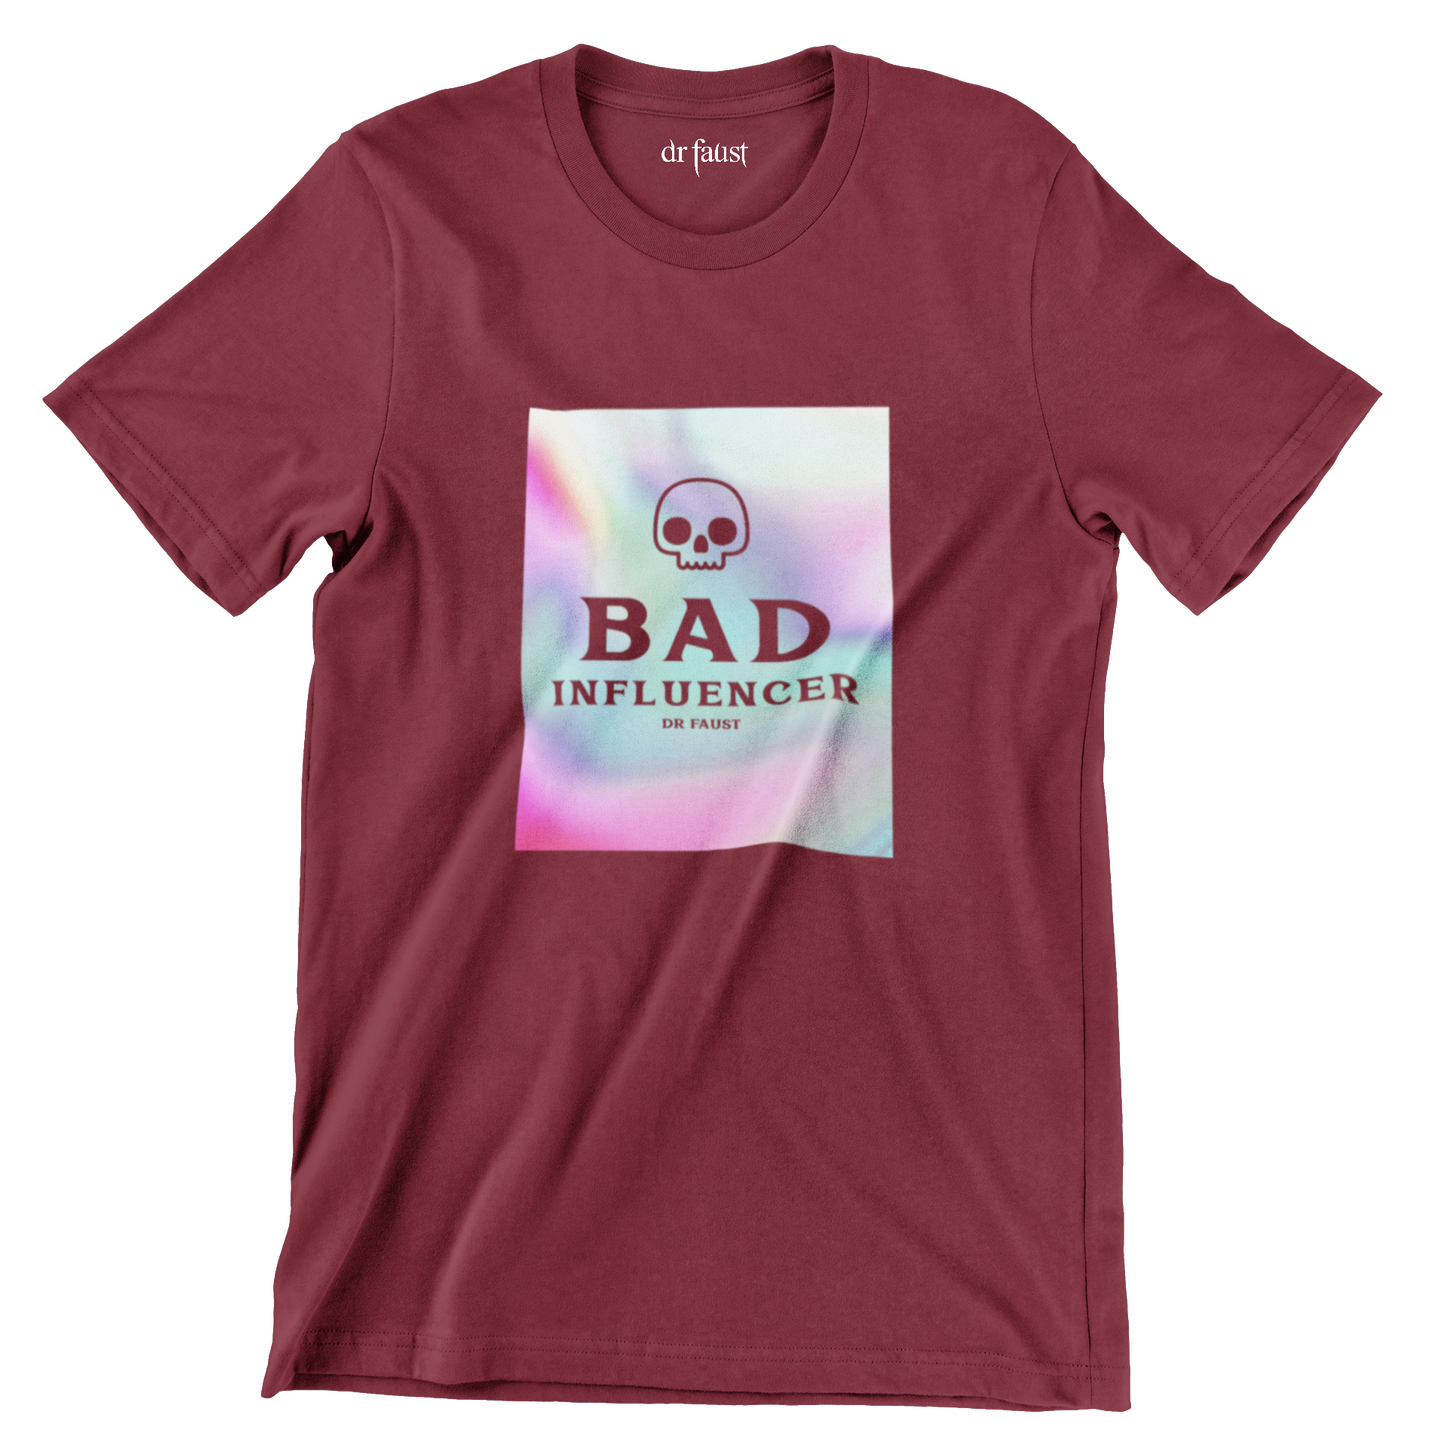 Dr Faust Bad influencer Maroon Unisex T-shirt.